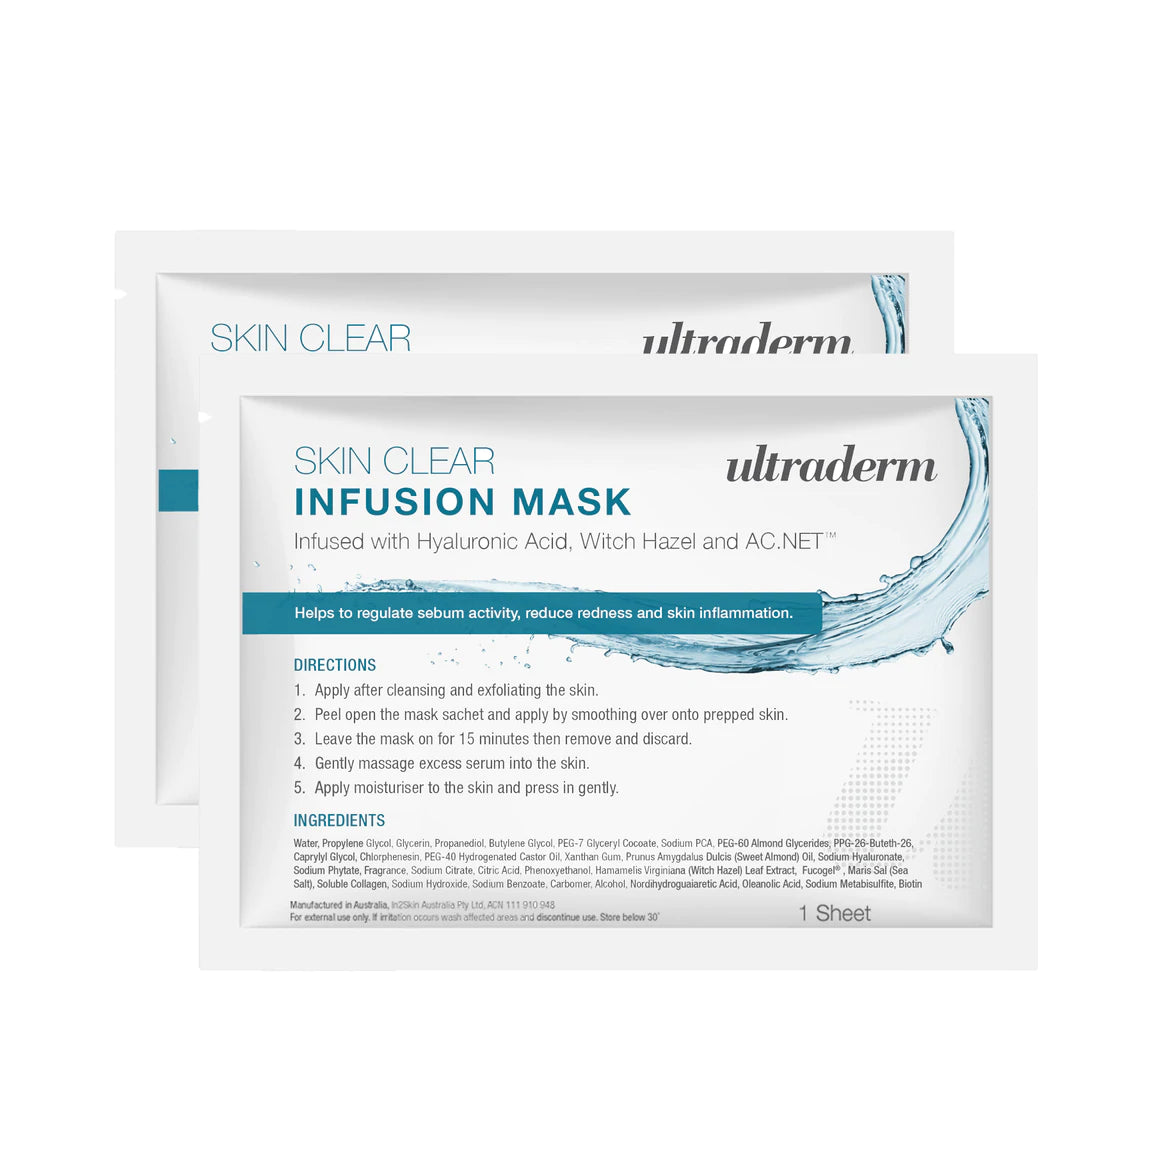 Skin Clear Infusion Mask